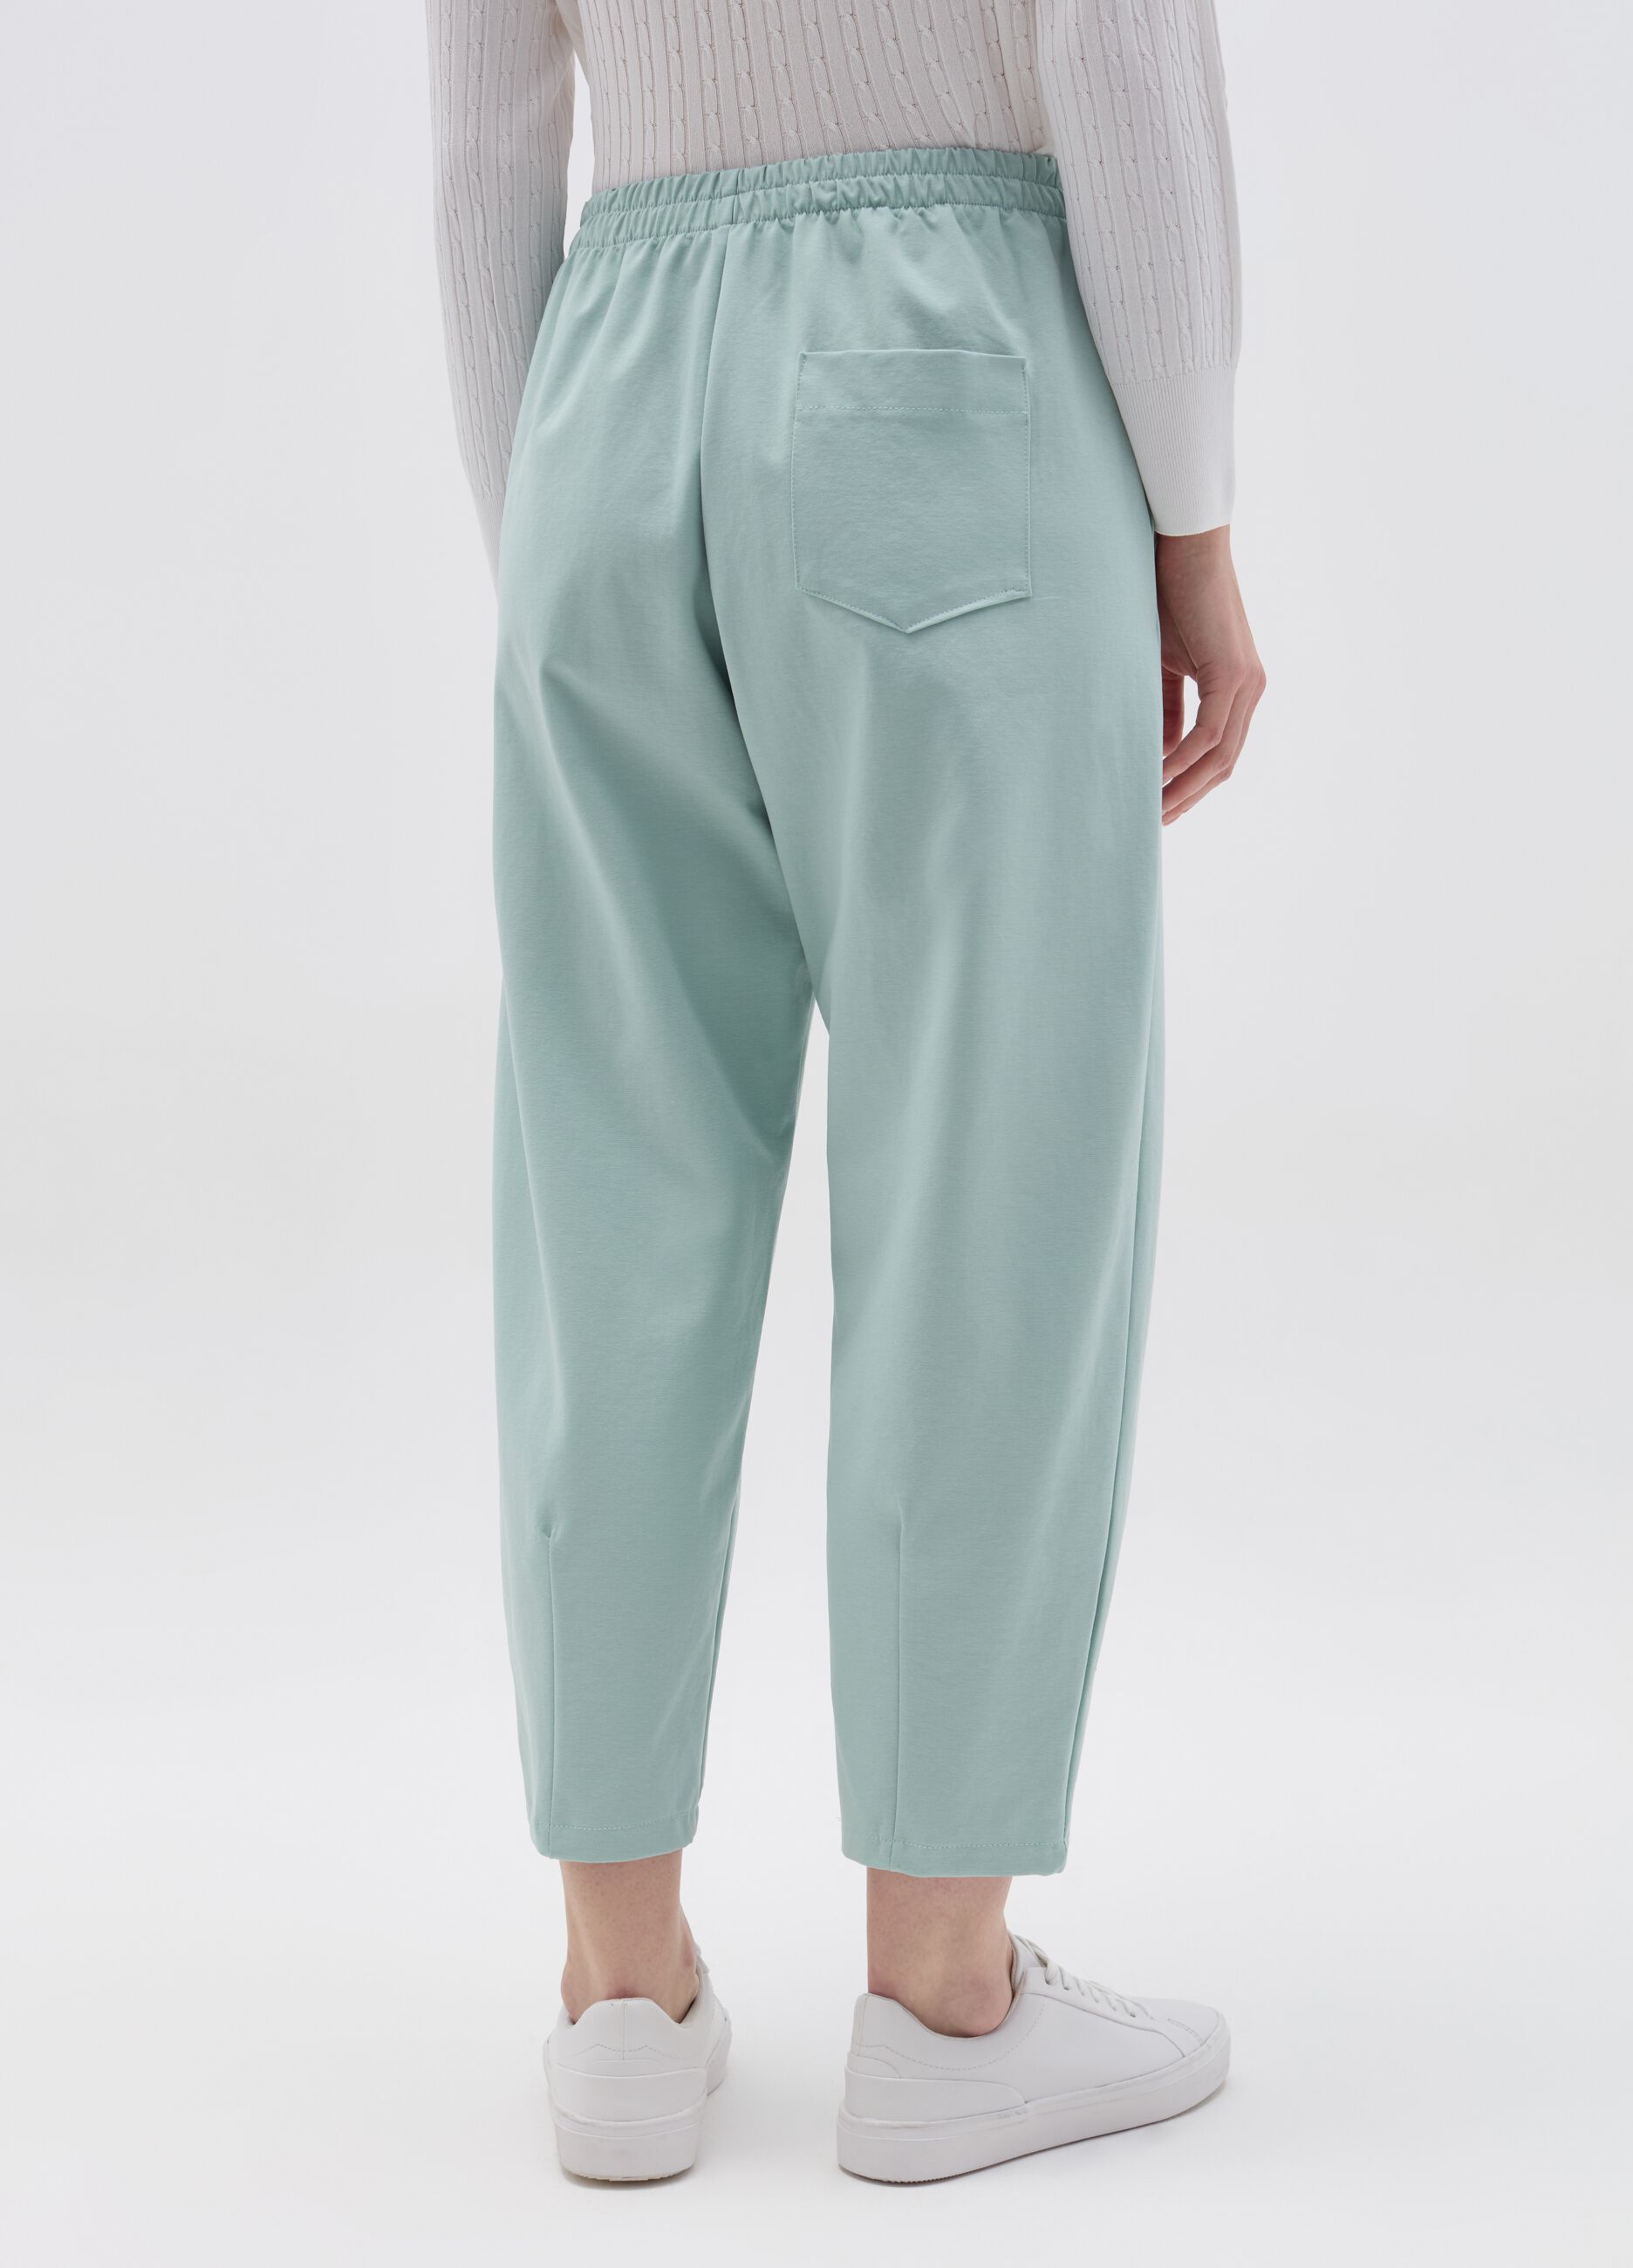 Carrot-fit cropped trousers